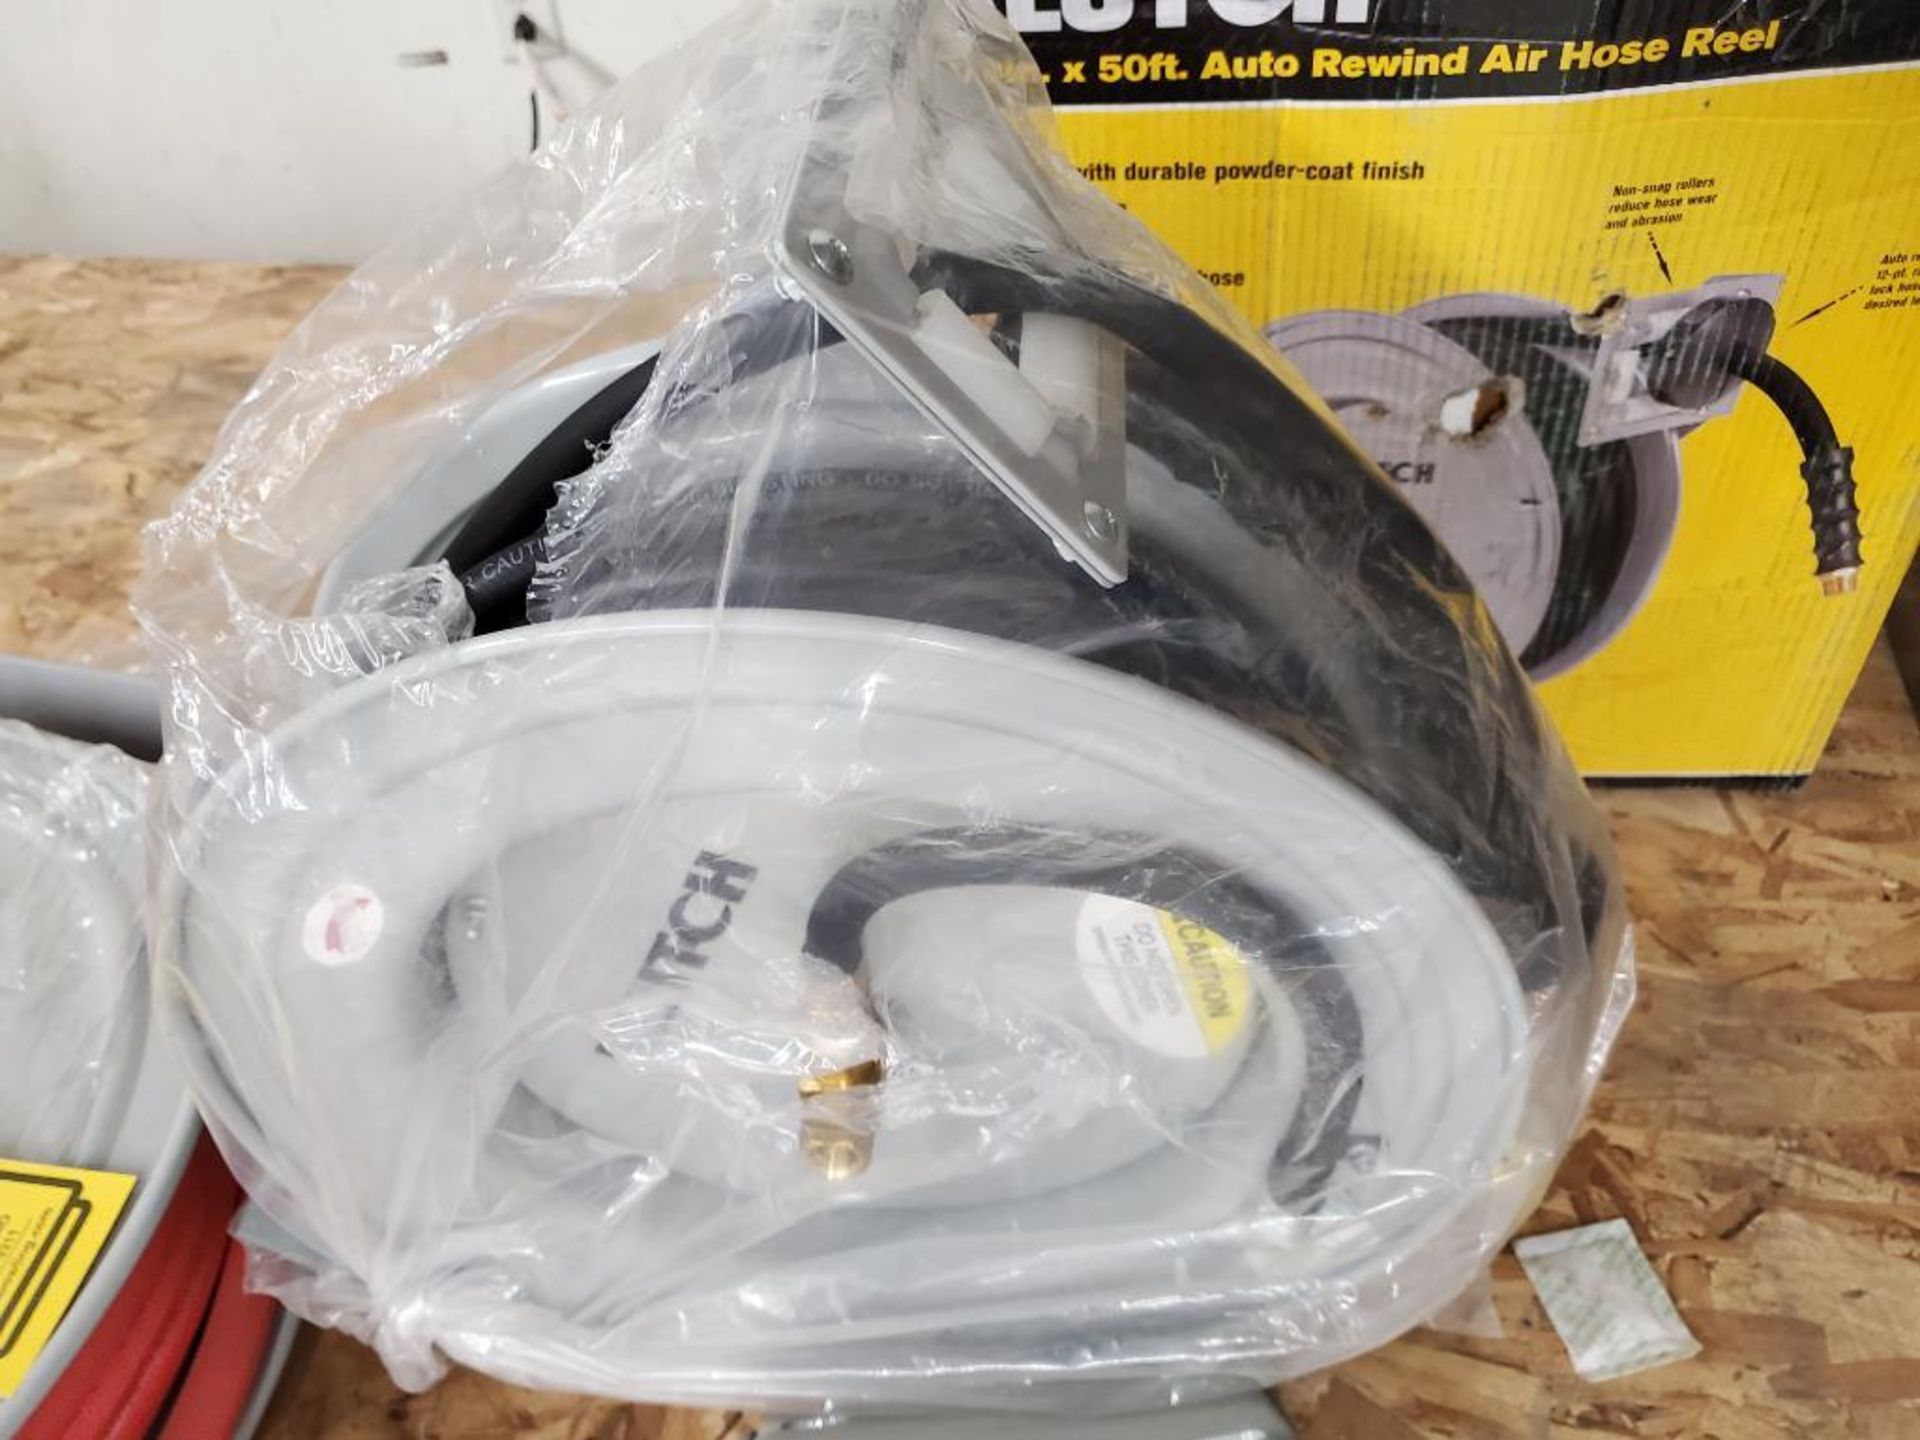 (New) Klutch Retractable Air Hose Reel, 3/8" x 50', Kink Resistant Rubber House, 300 PSI - Image 3 of 3